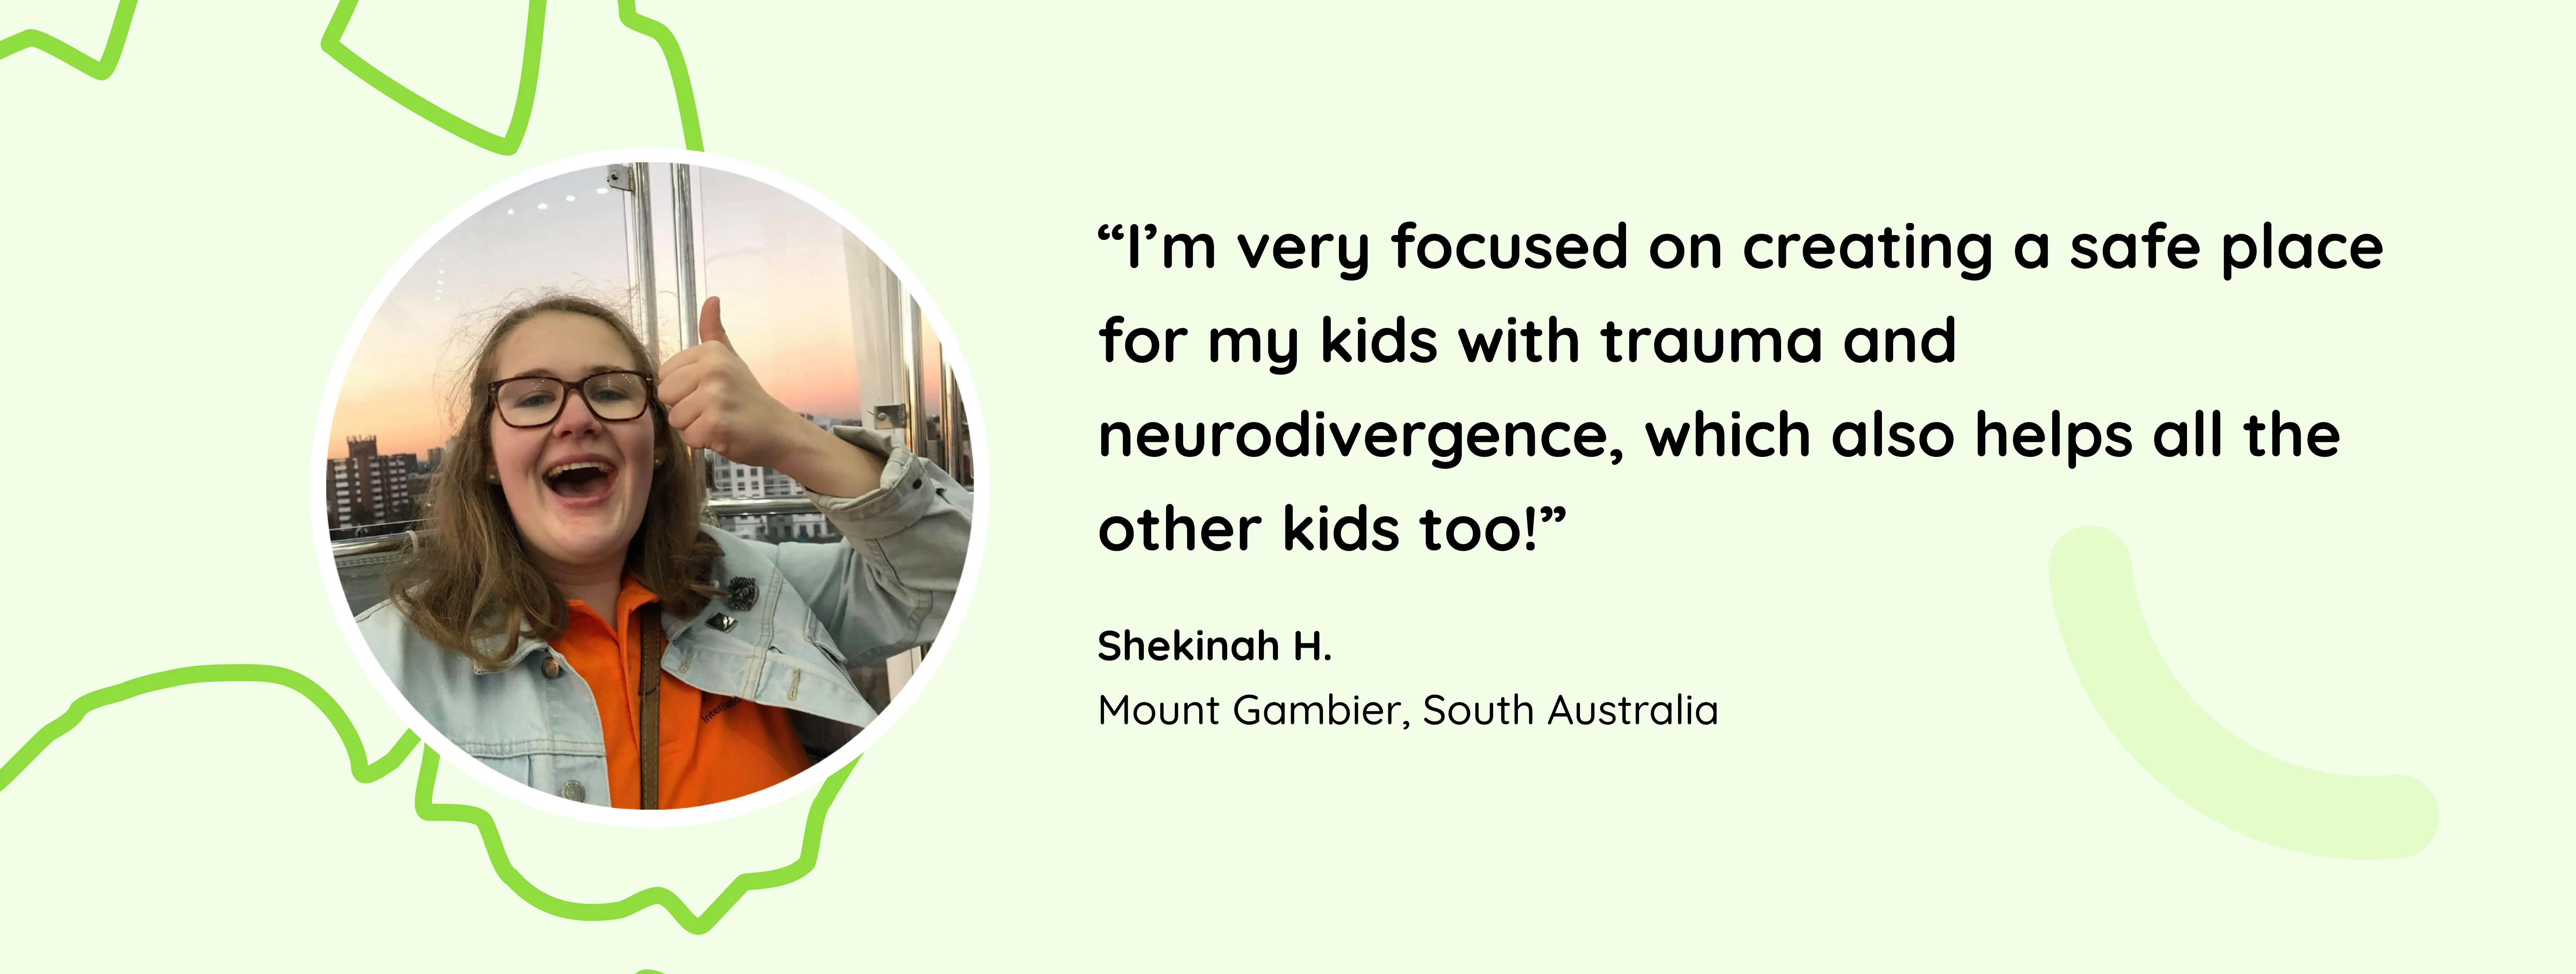 This visual shows Shekinah, who is a teacher from South Australia, sharing how Classroomscreen helps her teach students with neurodivergence/trauma.